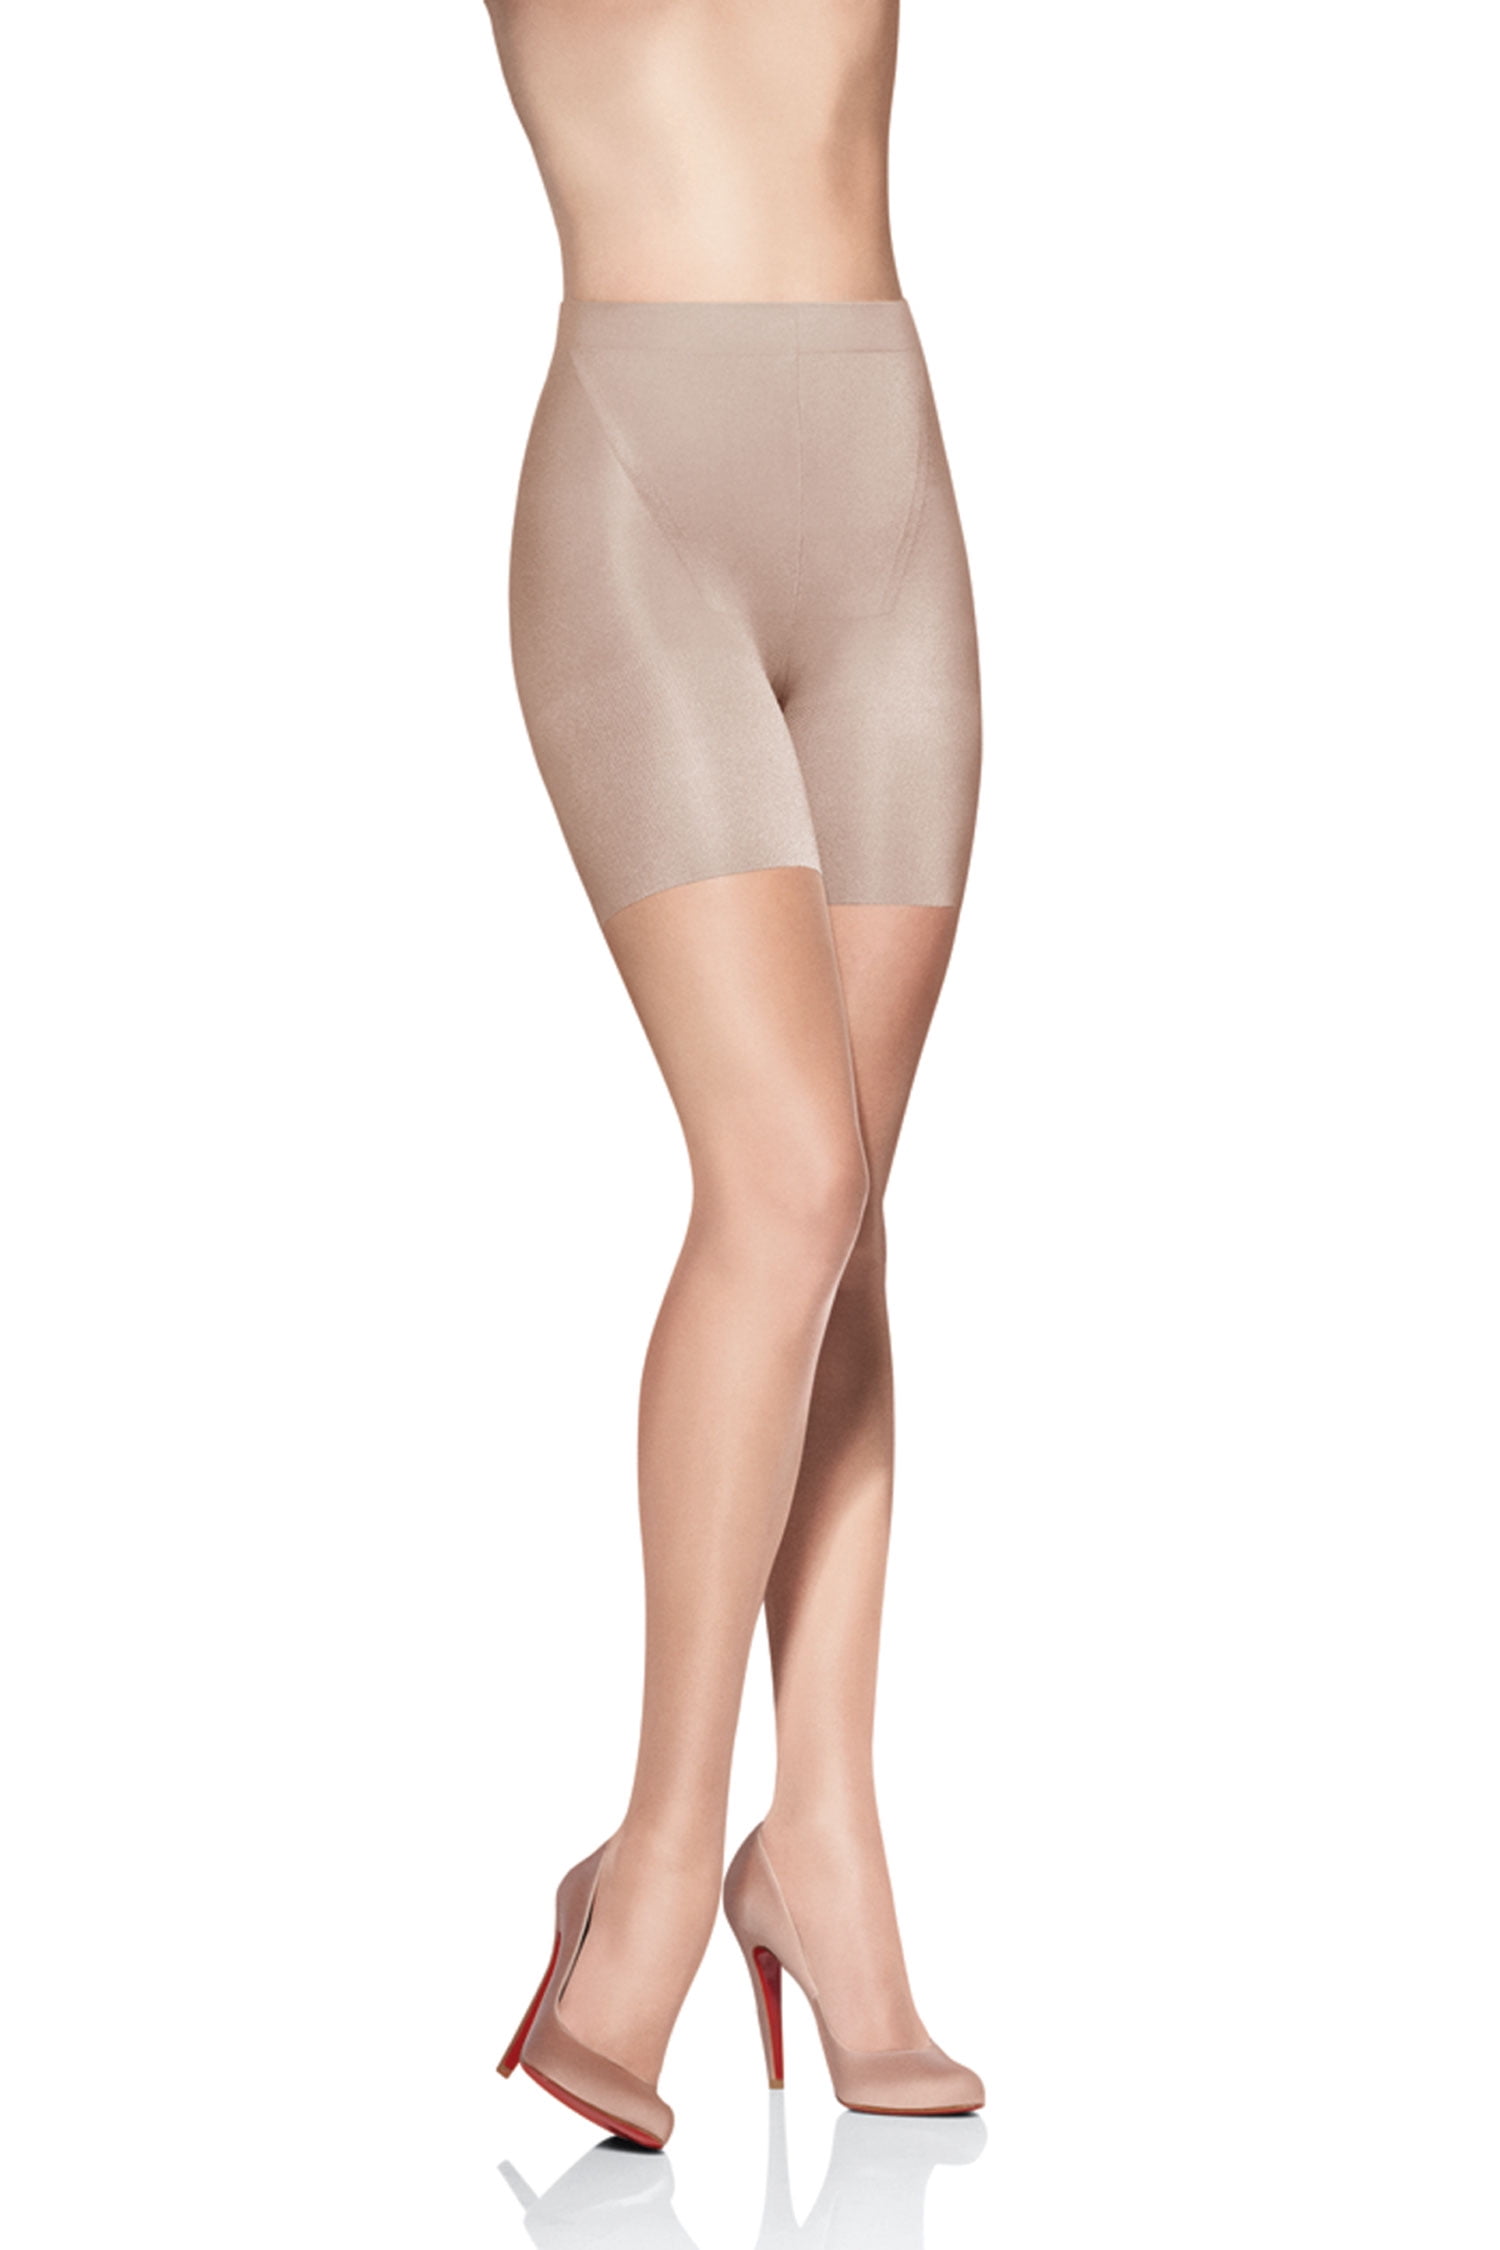 Spanx In-Power Line Super High Footless Shaper 912